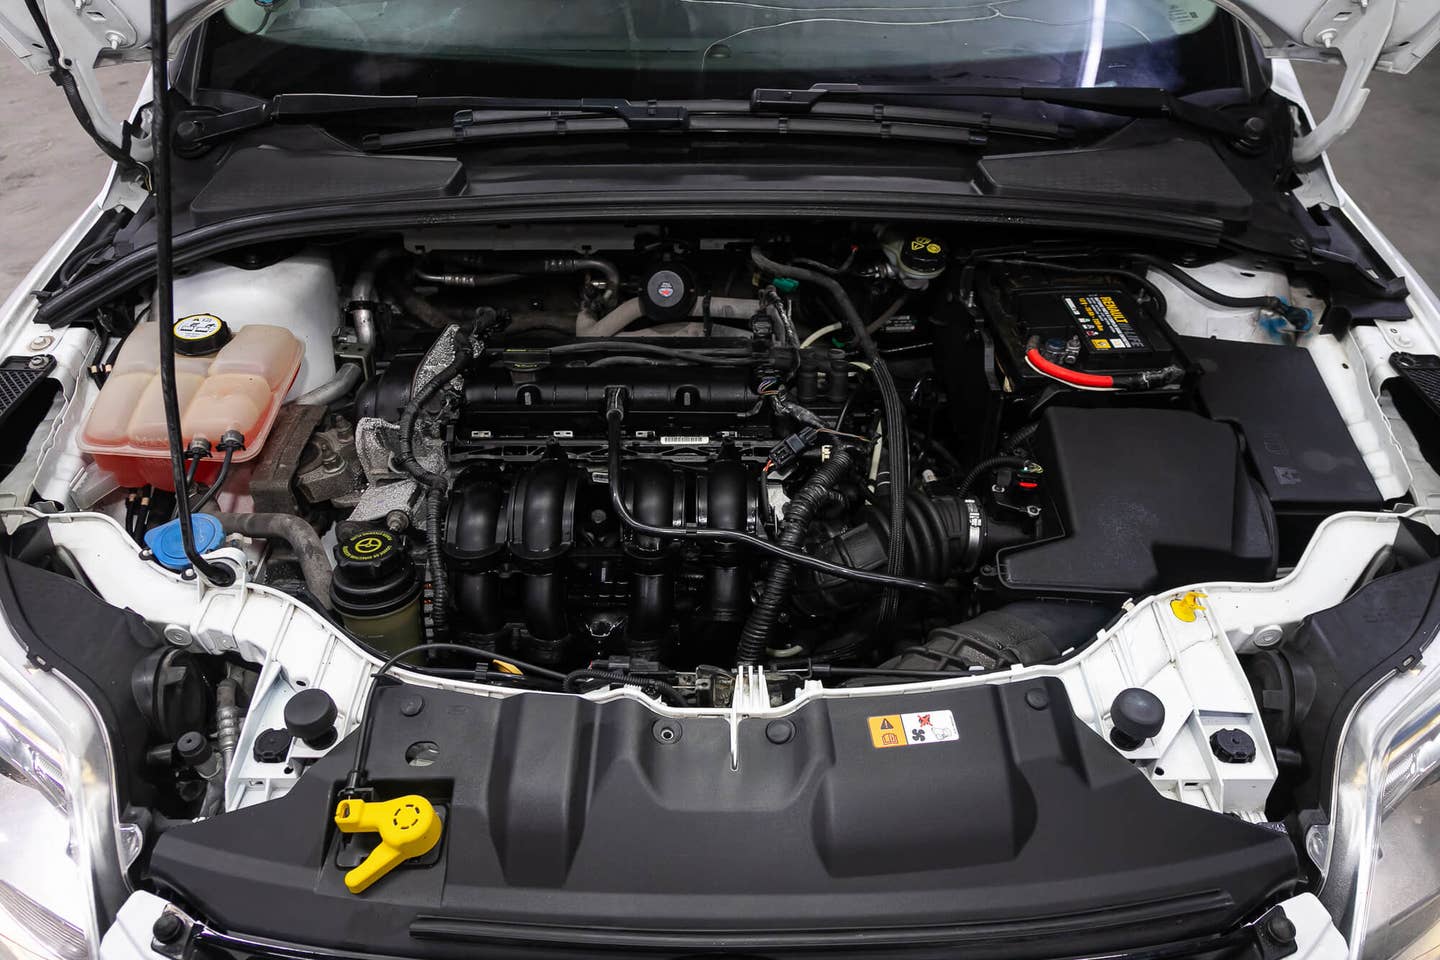 Ford Focus under the hood